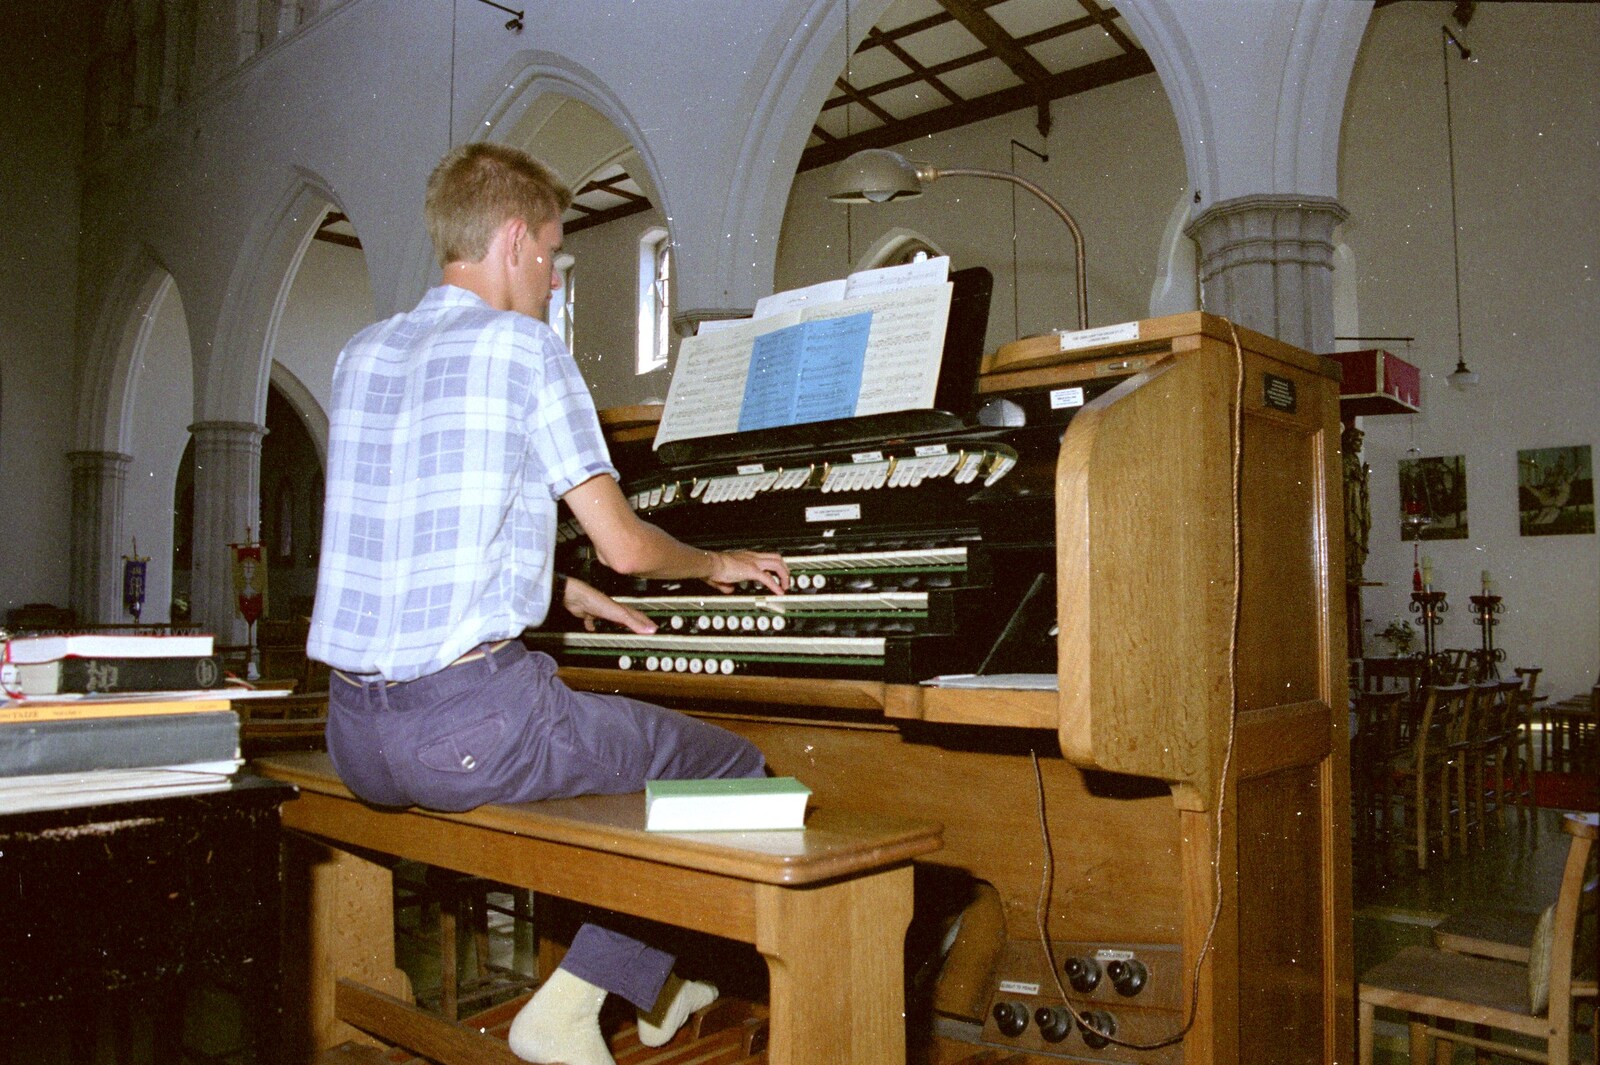 Uni: Country Clubs, On The Beach and Organs, Plymouth - 28th May 1989: Nosher plays the organ